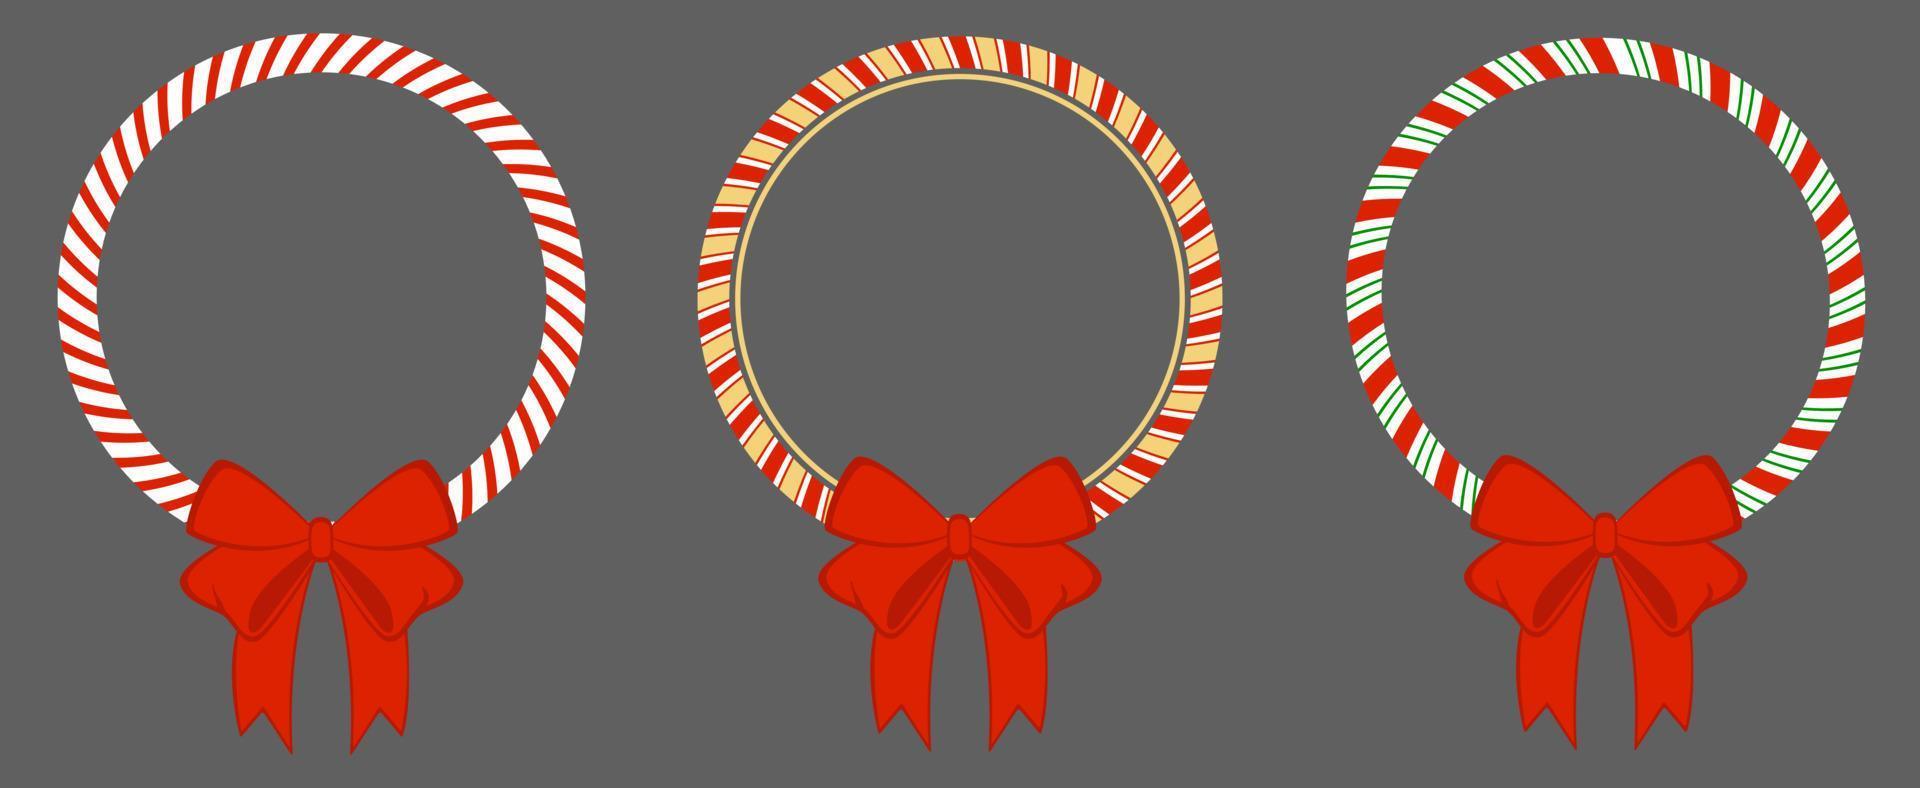 Circle frame candy cane. Red bow Christmas border. Isolated vector illustration, flat style.